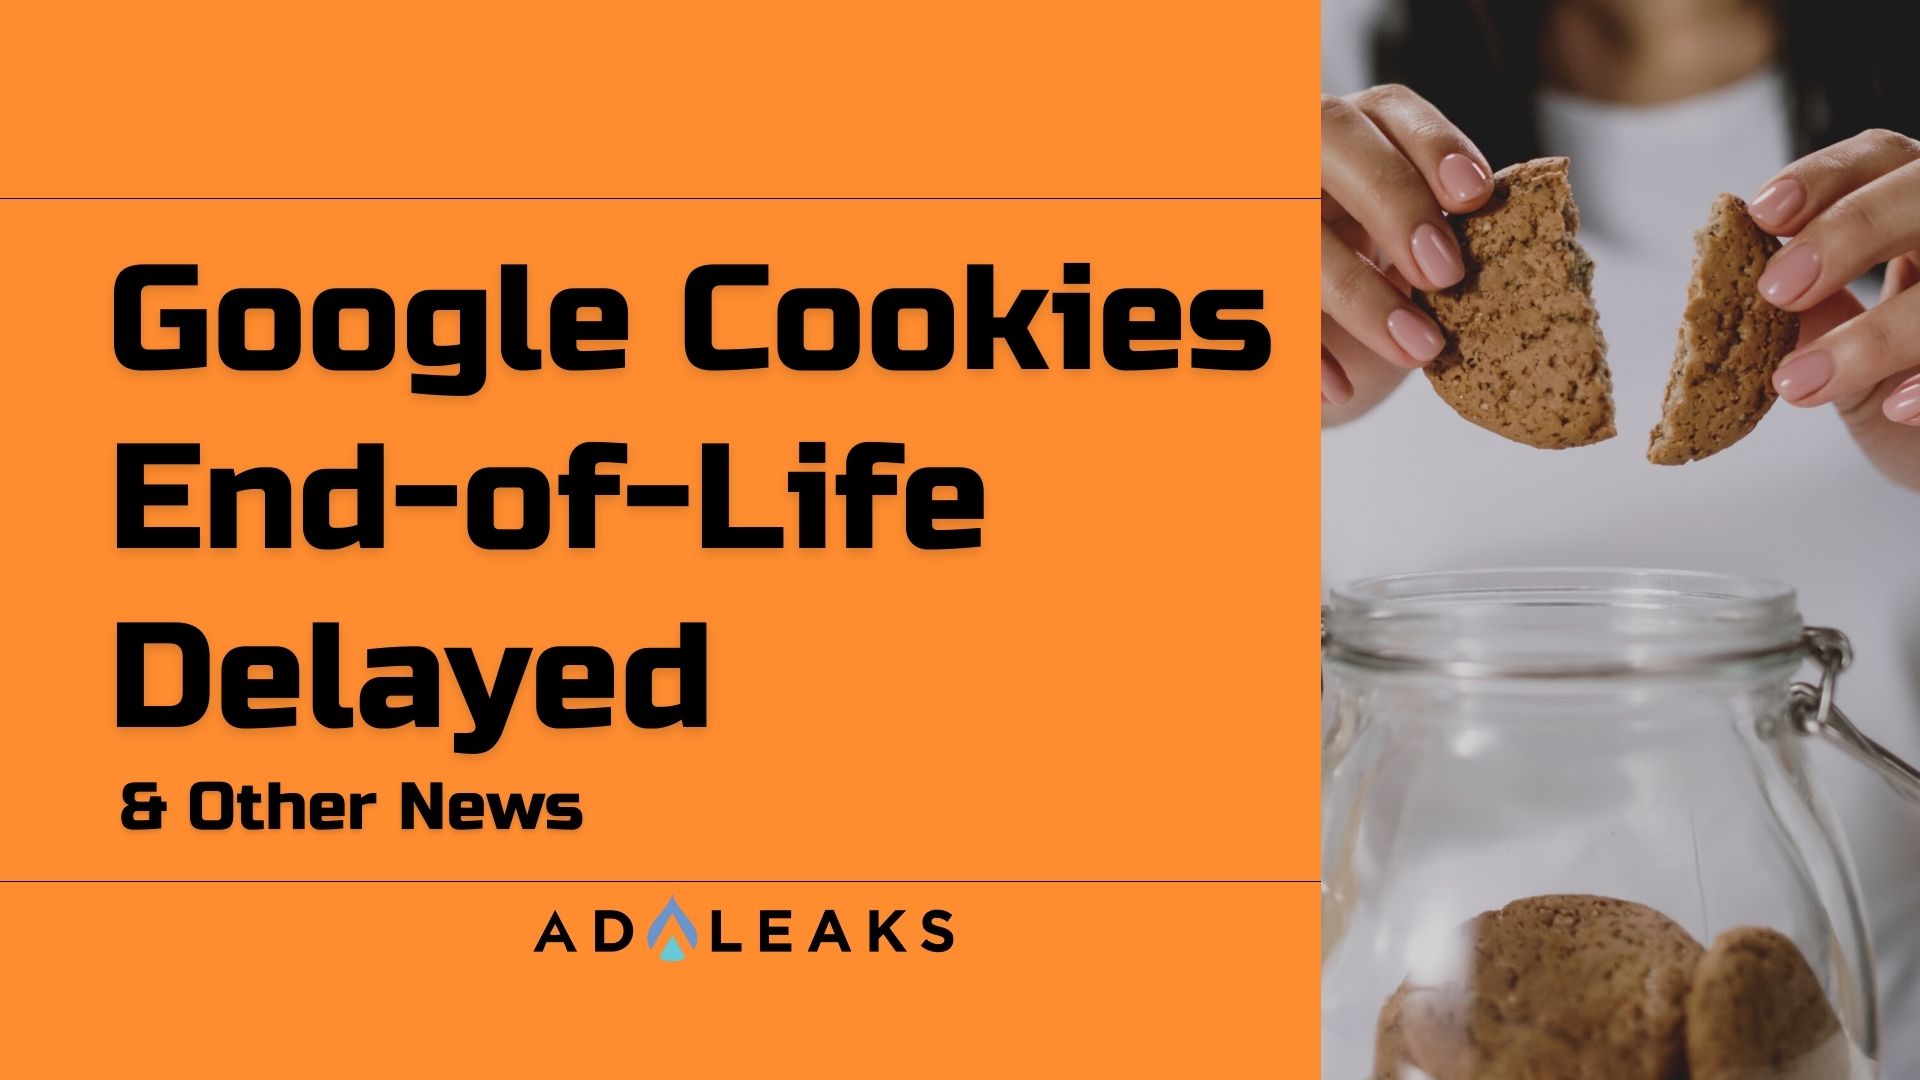 google cookies end of life delayed & other news